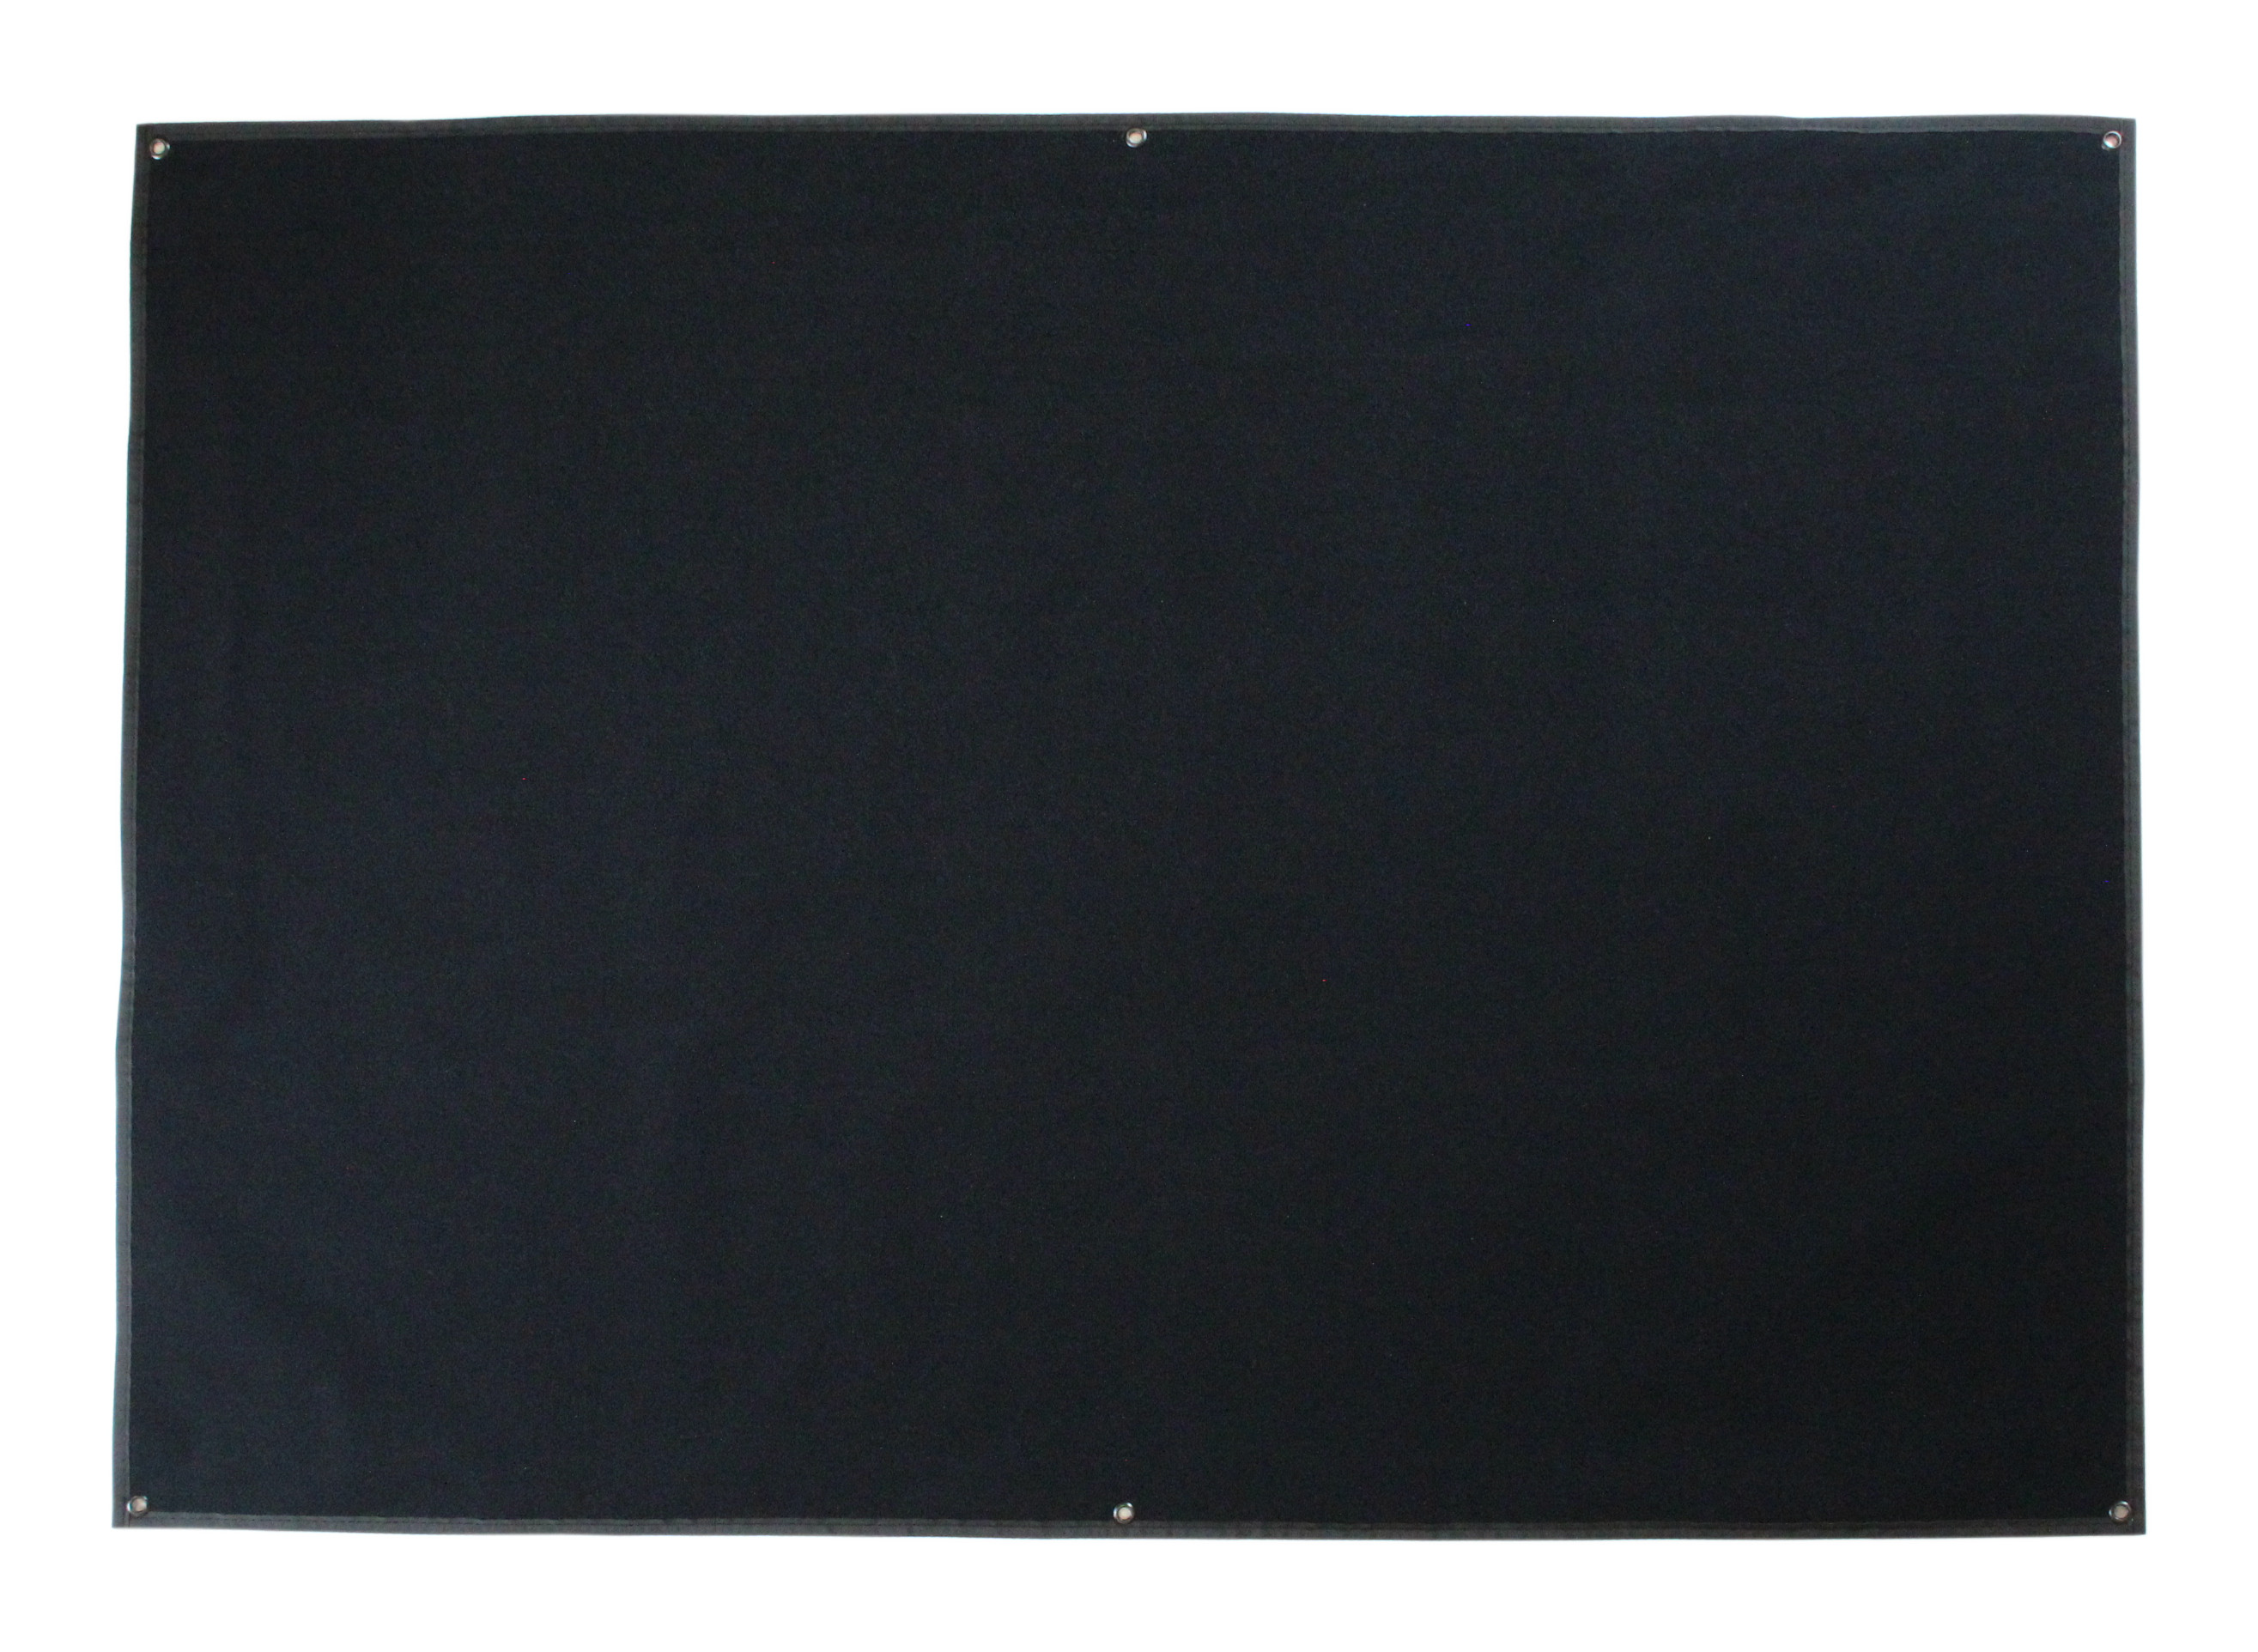 Patchwall for PVC patches 70cm x 100cm in black and olive